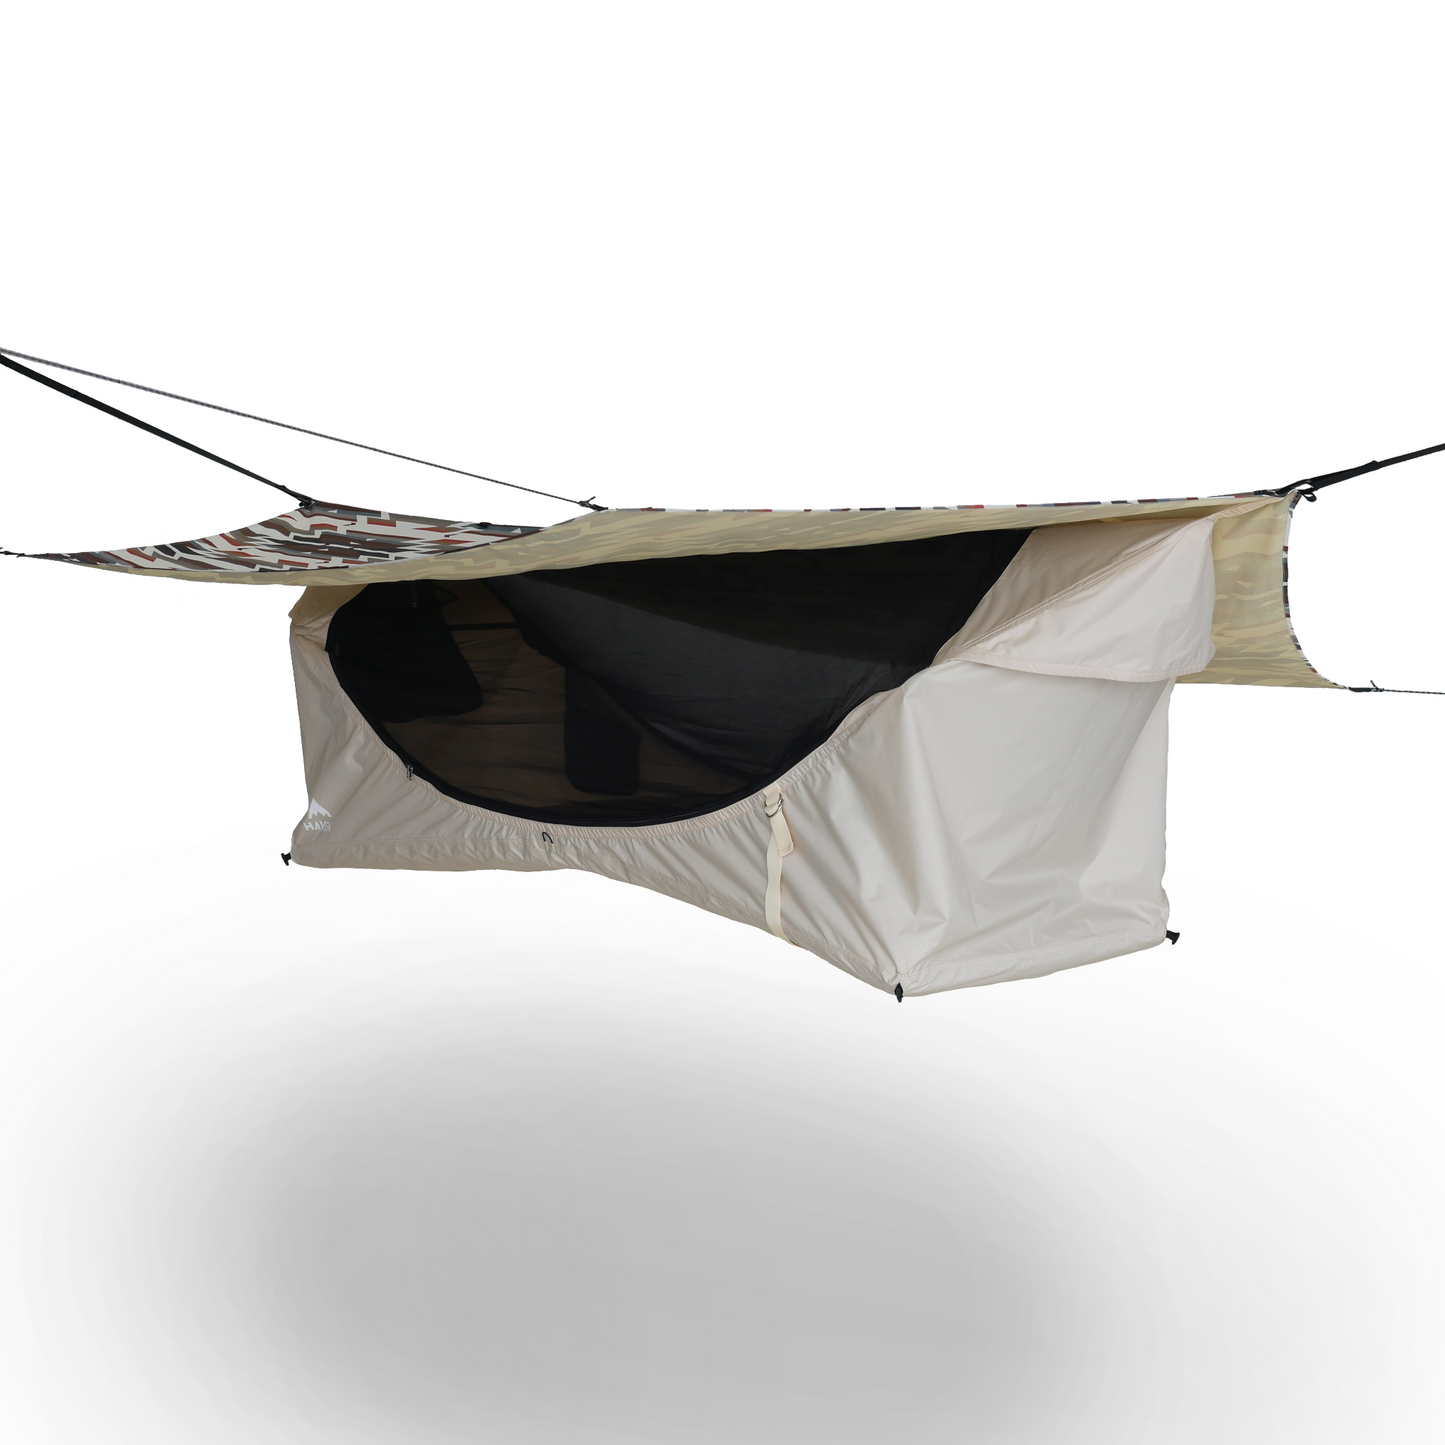 Camping hammock with rainfly on a white background